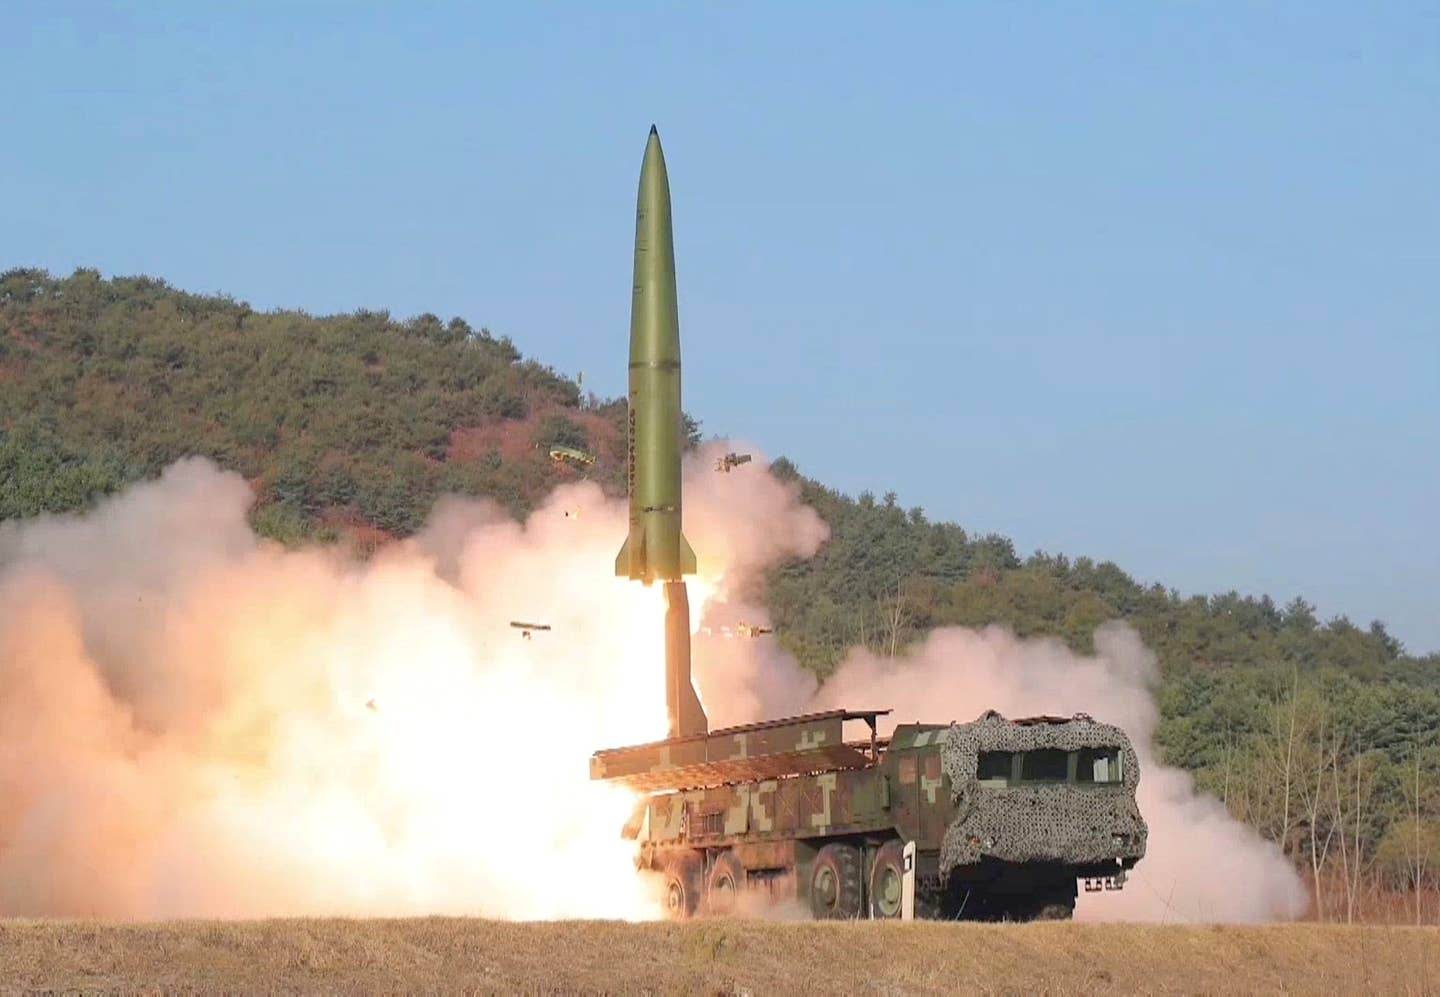 The North Korean KN-23 short-range ballistic missile seen here may be among the types that Russia has received. <em>North Korean State Media</em>